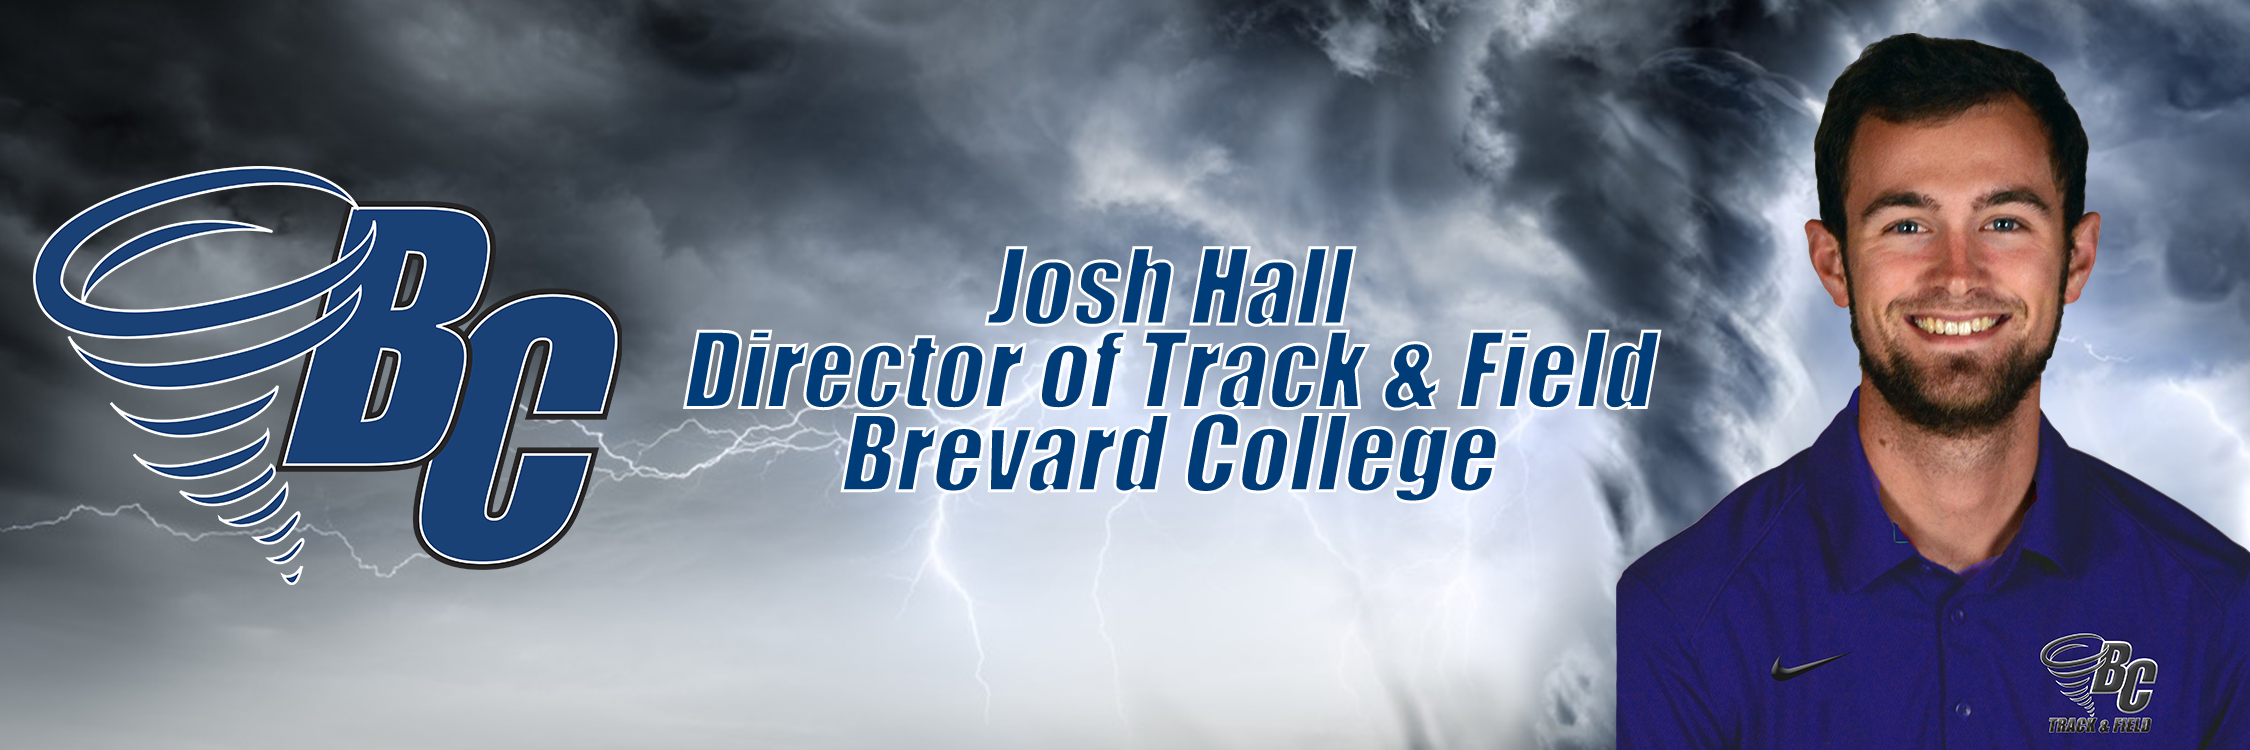 Josh Hall Selected as Director of Track & Field at Brevard College